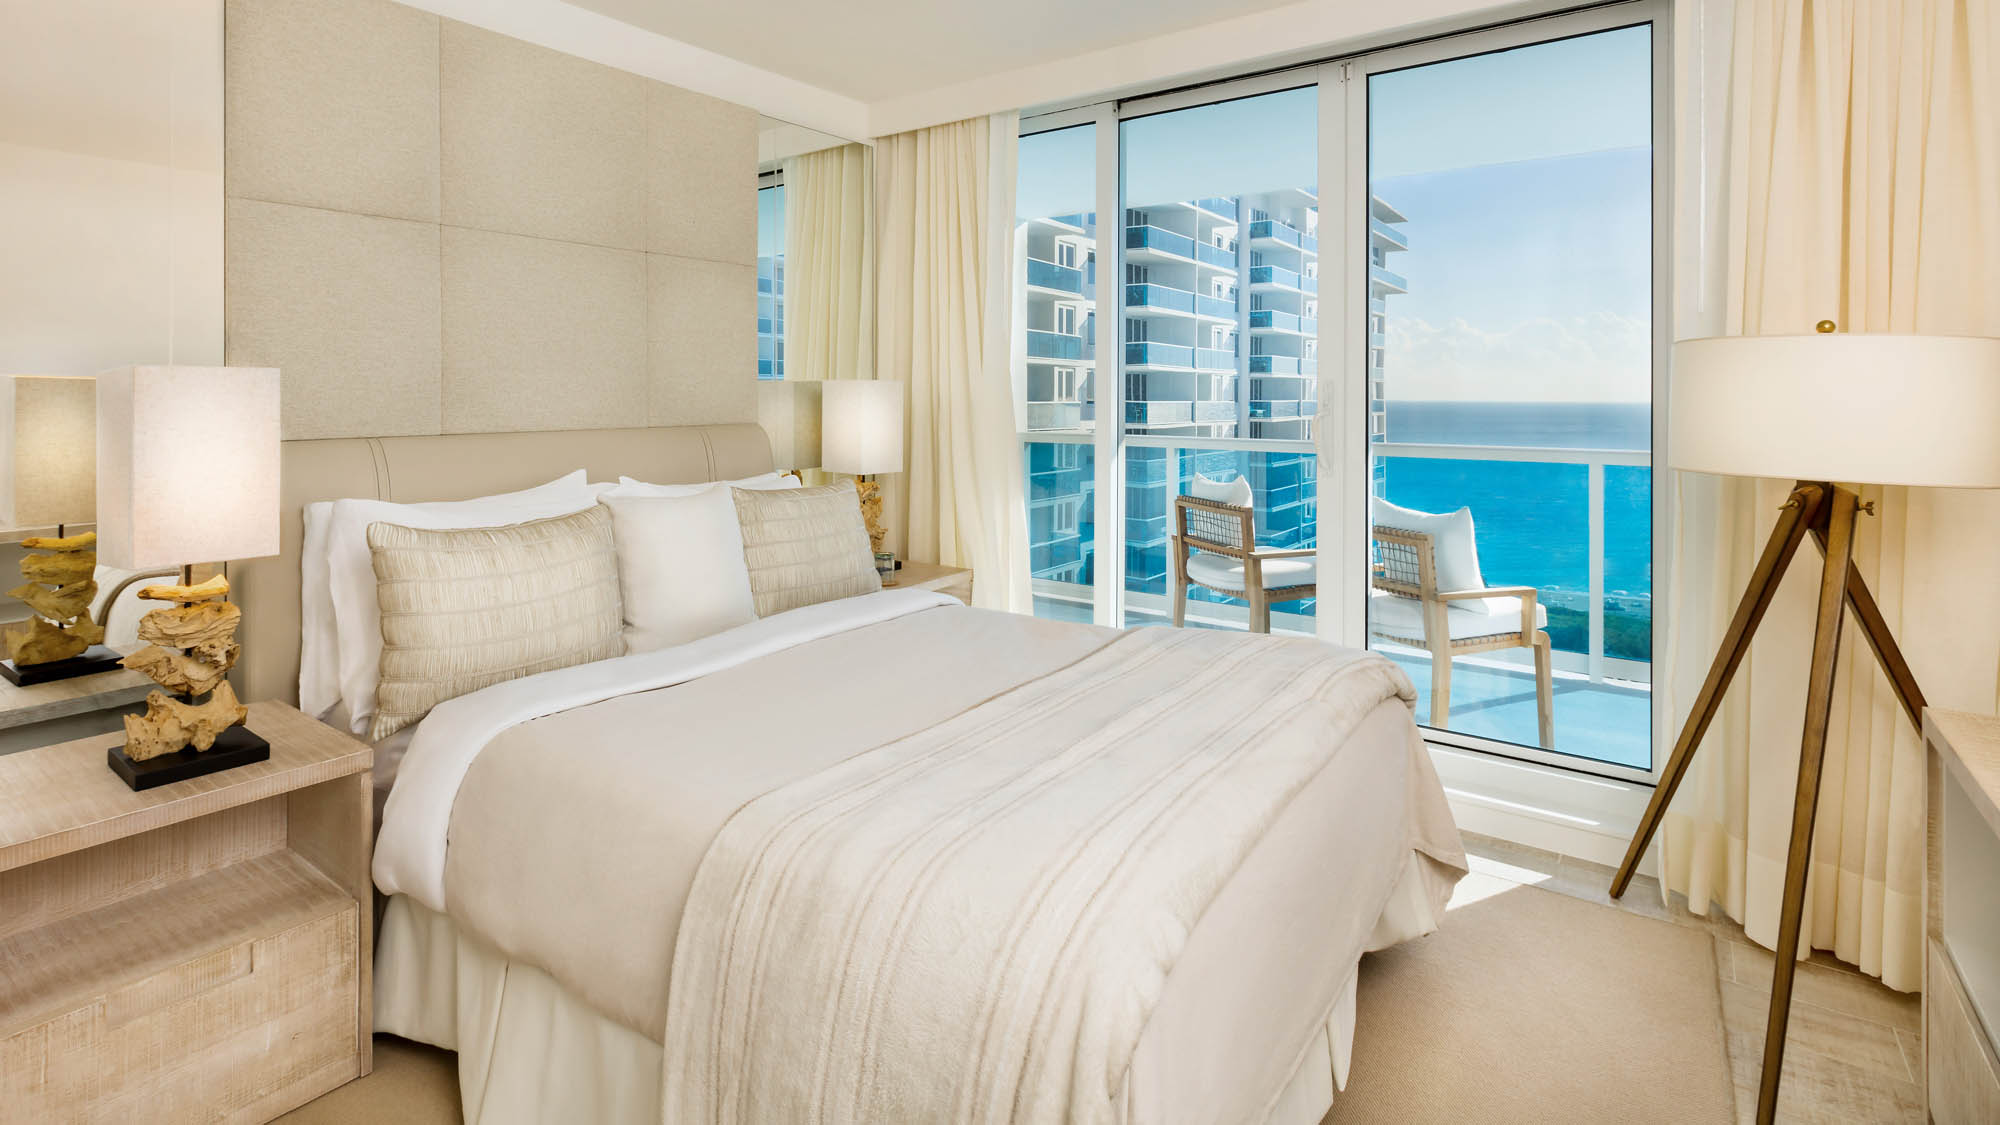 Florida-Miami-South_Beach-Hotel-One_Hotel-Residence-Bedroom